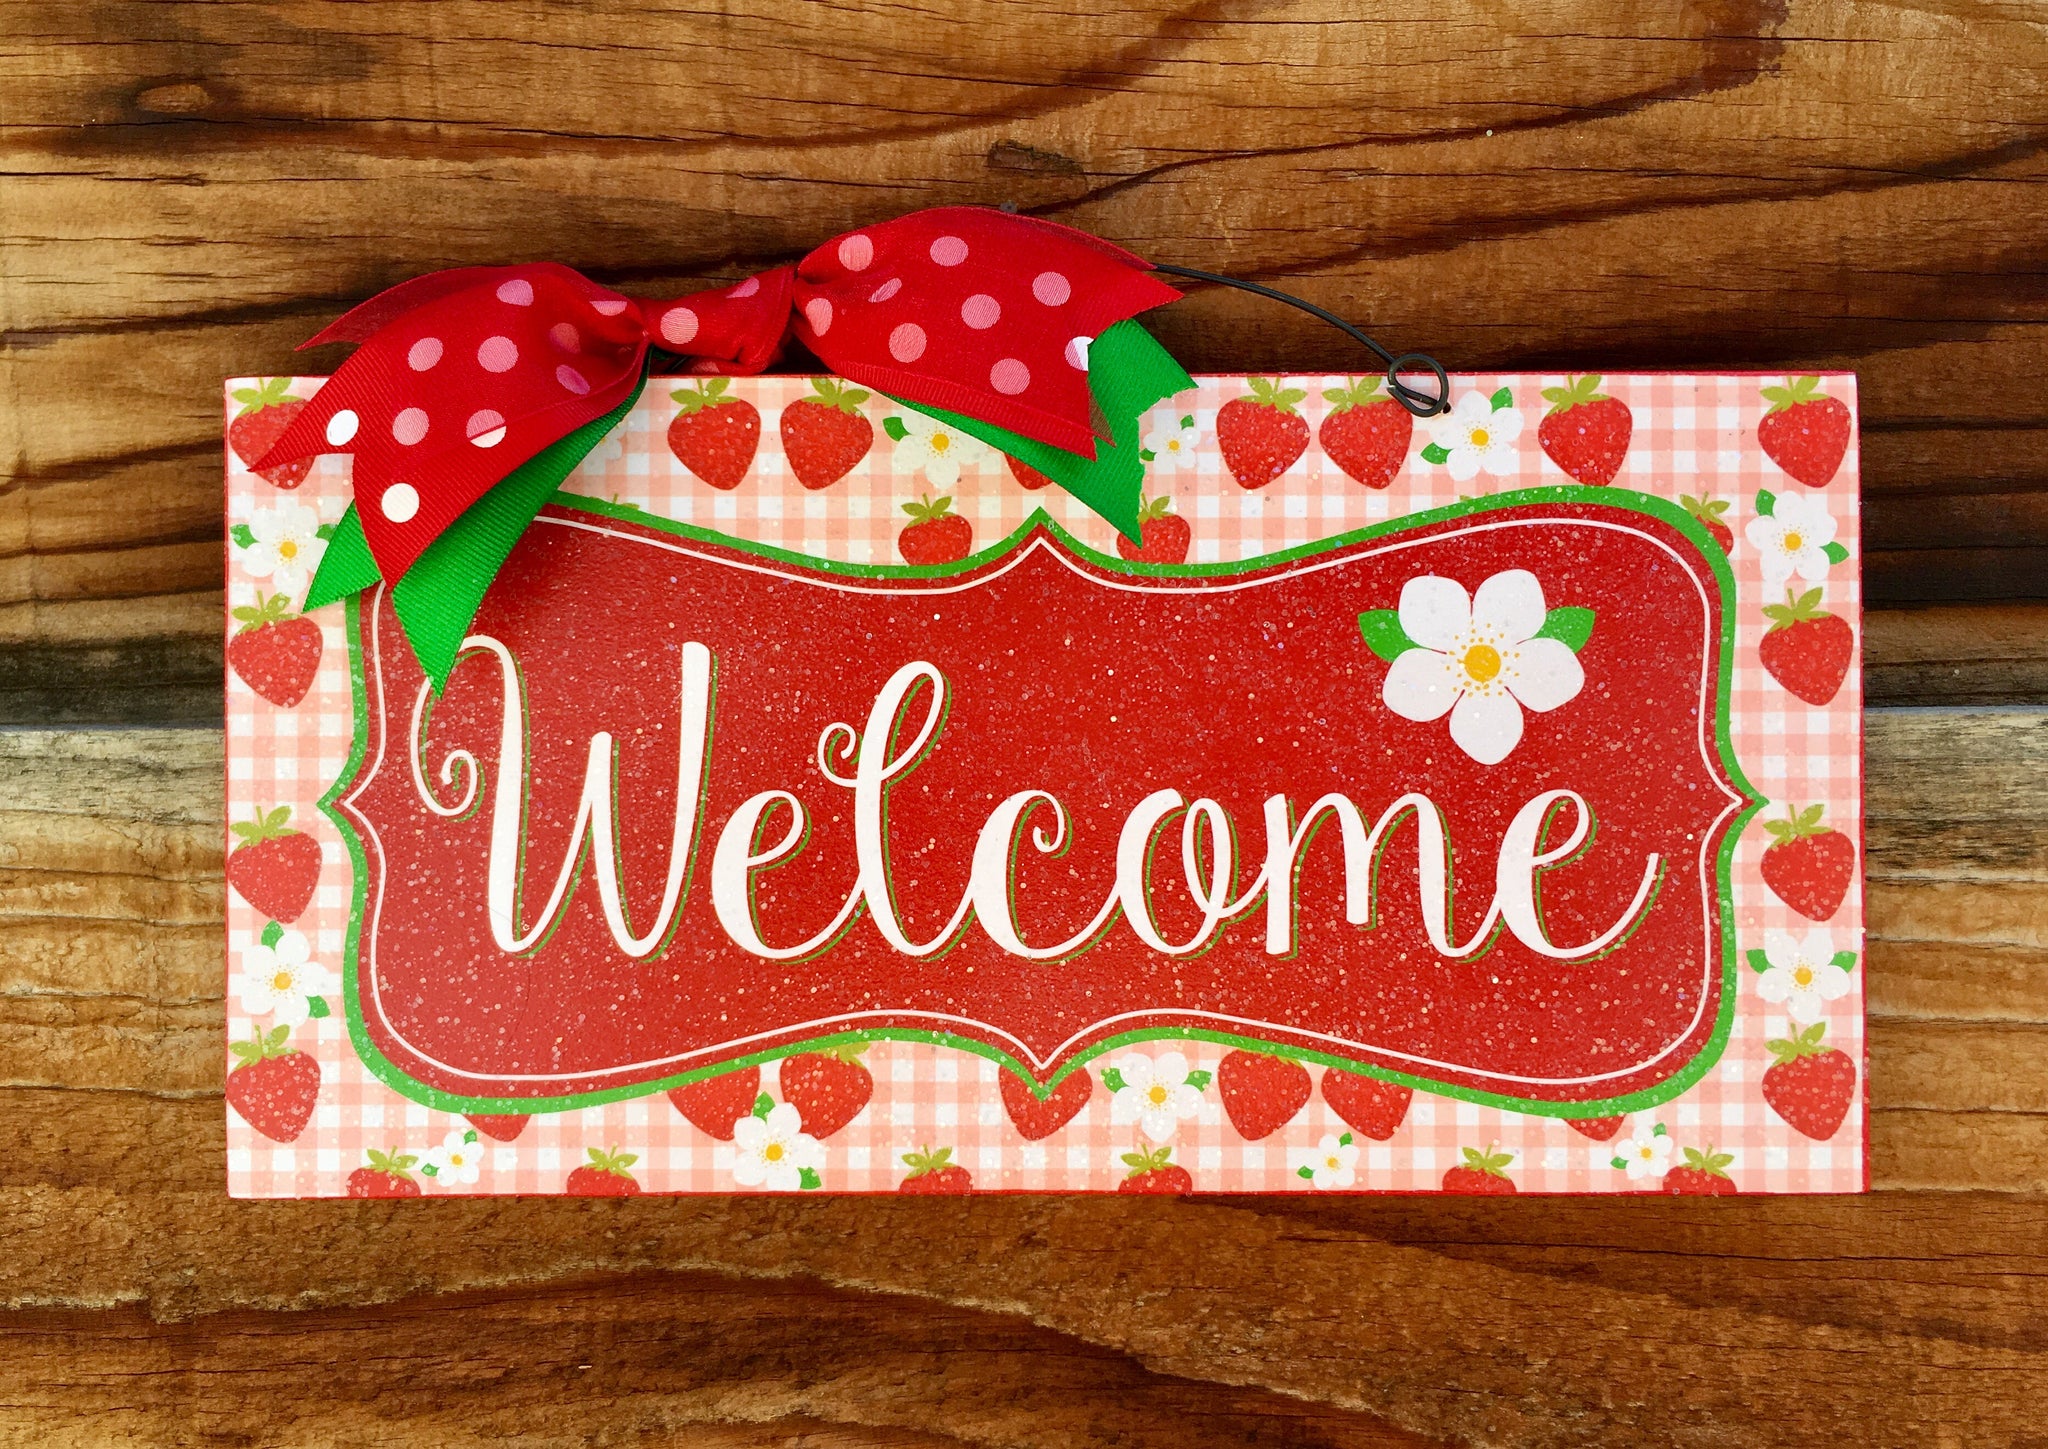 Welcome Strawberry sign.